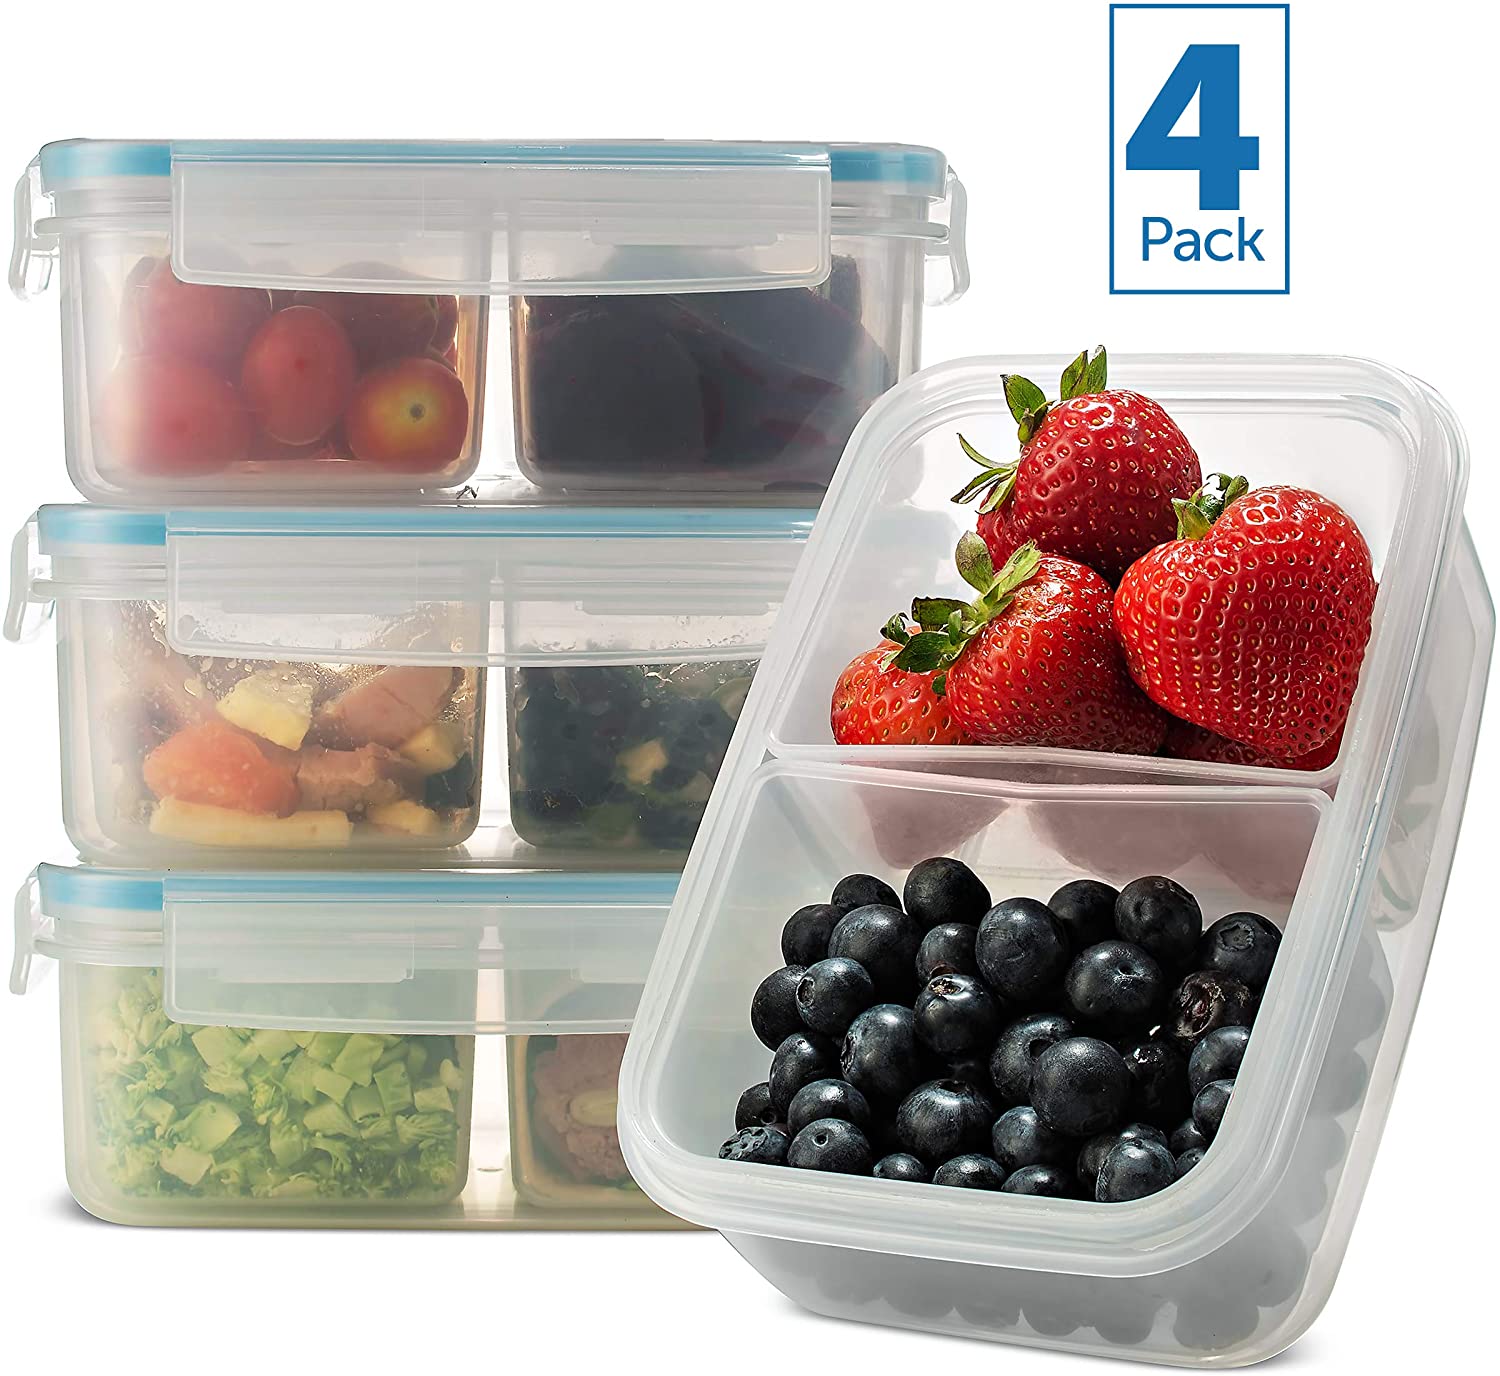 Komax Biokips Rectangular Food Storage Container With Separator, 900 ml - Whole and All